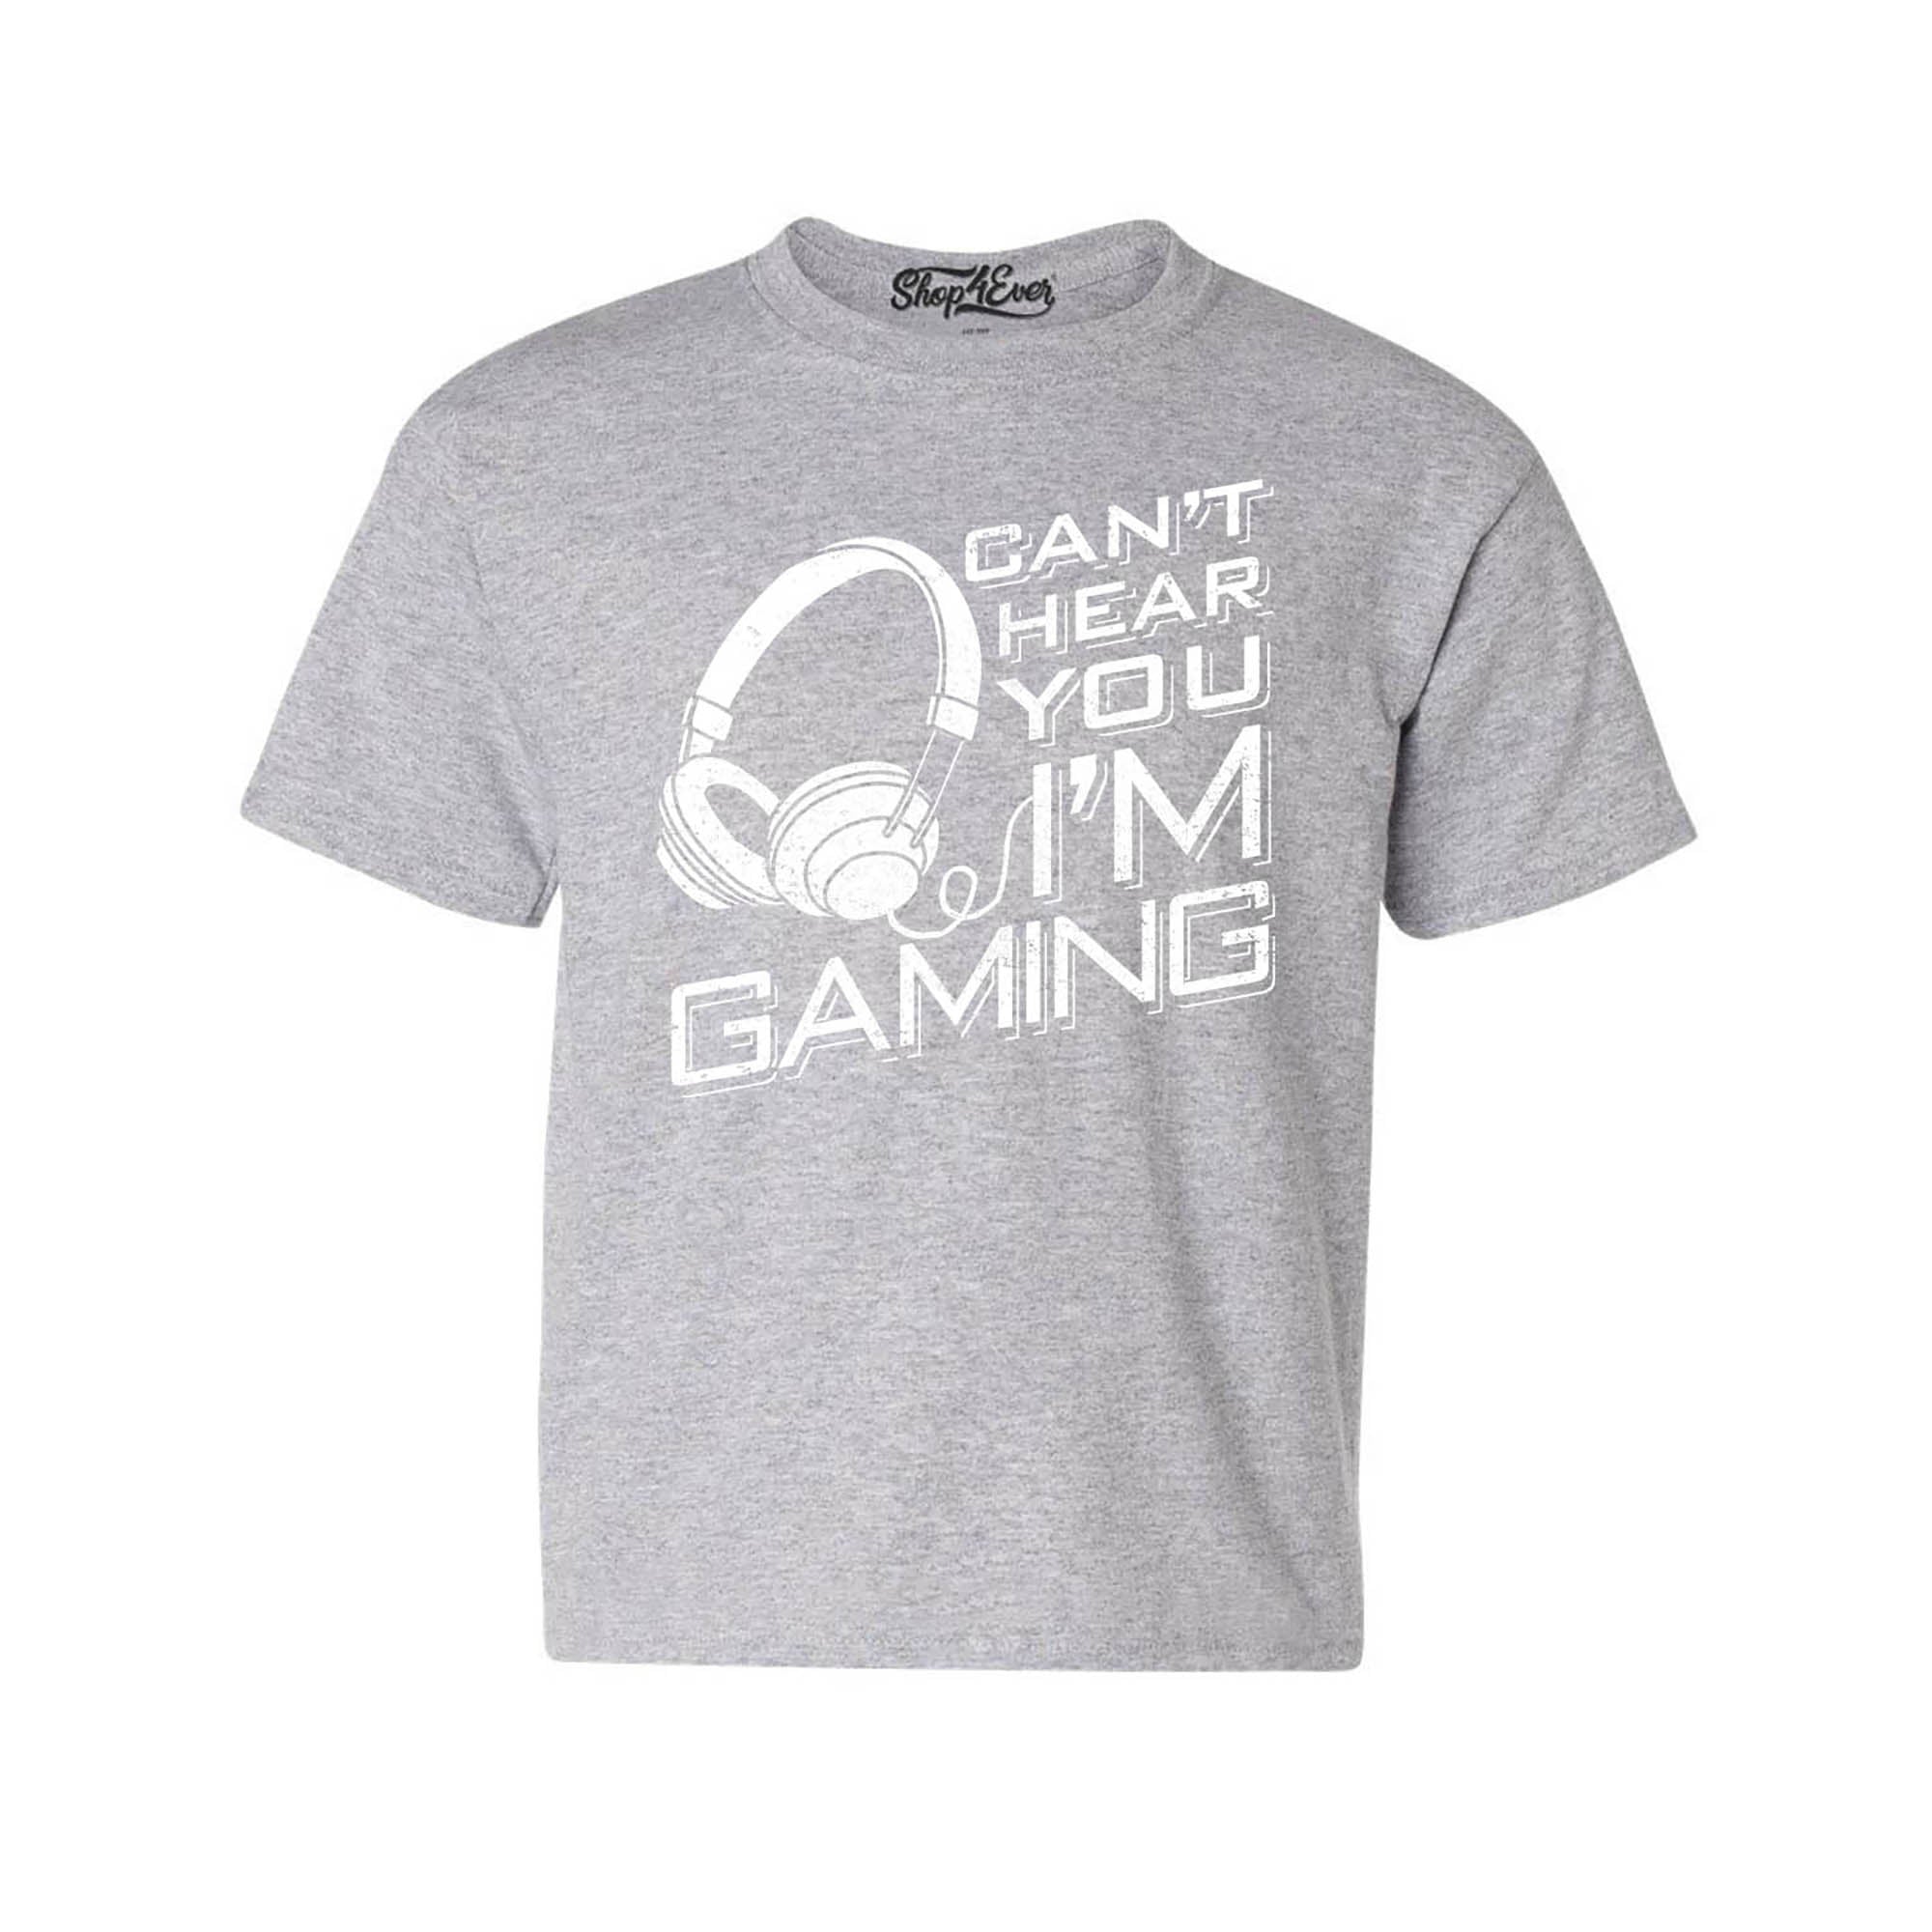 Can’t Hear You I'm Gaming Youth's Kids Child T-Shirt